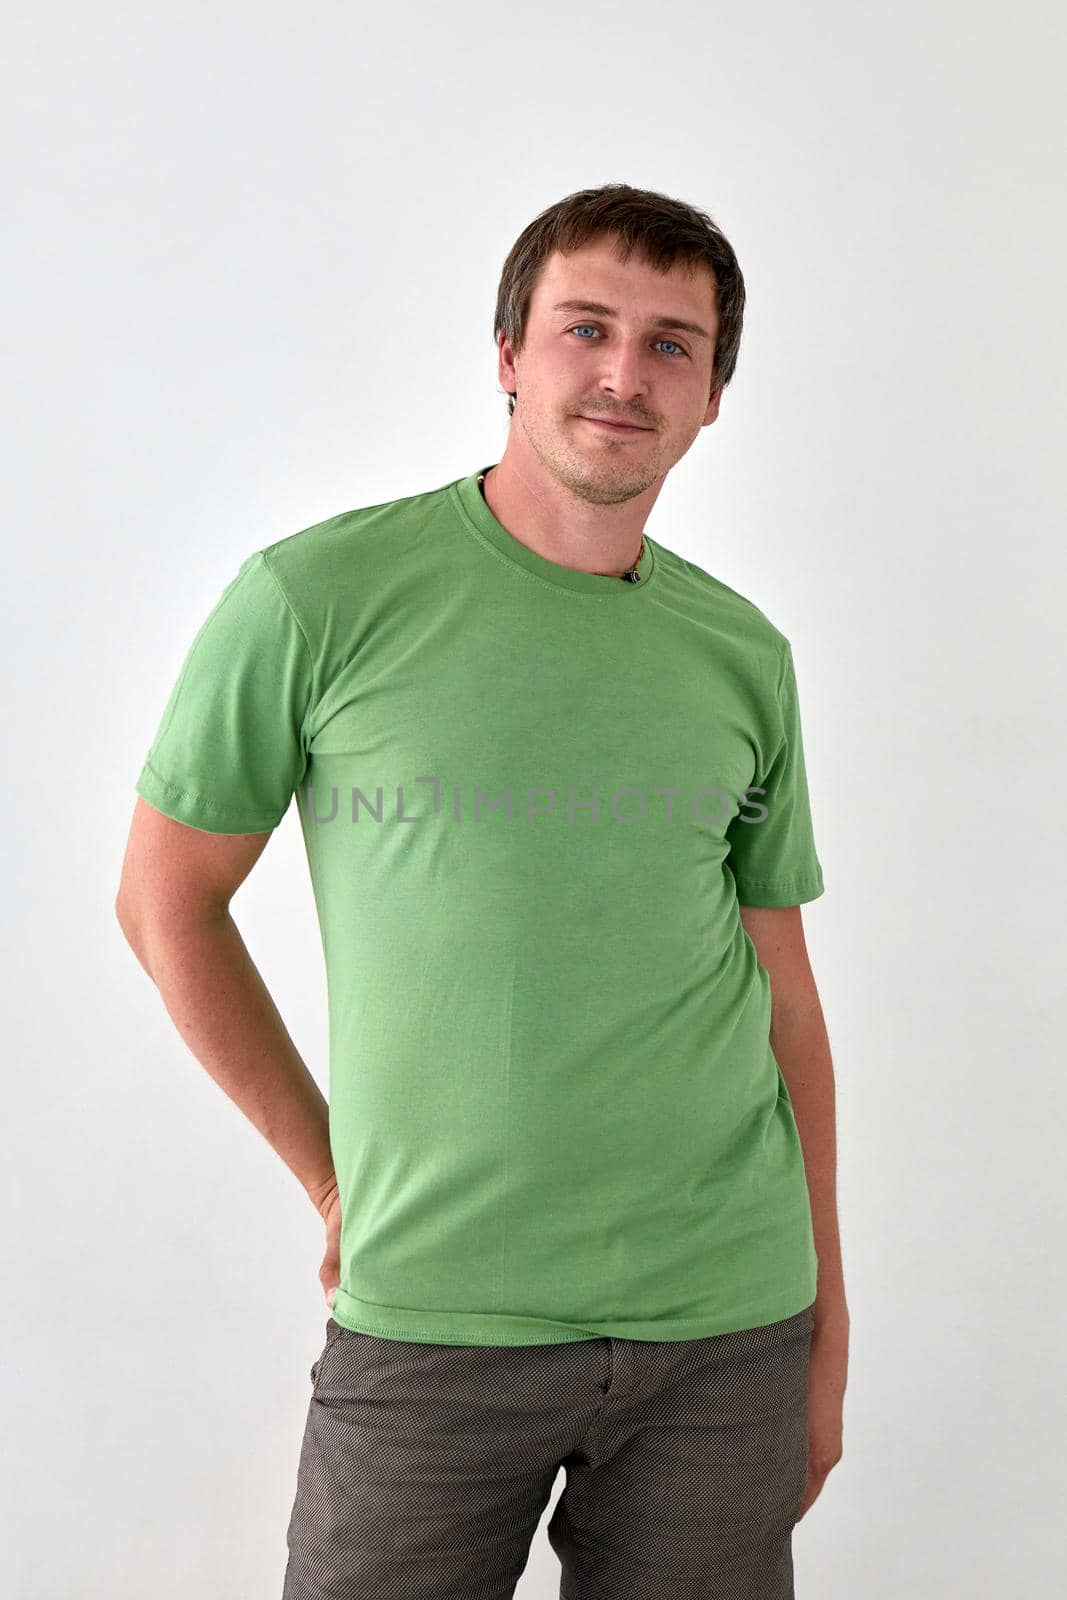 Positive young male in jeans with hand behind and green t shirt standing against white background and looking at camera